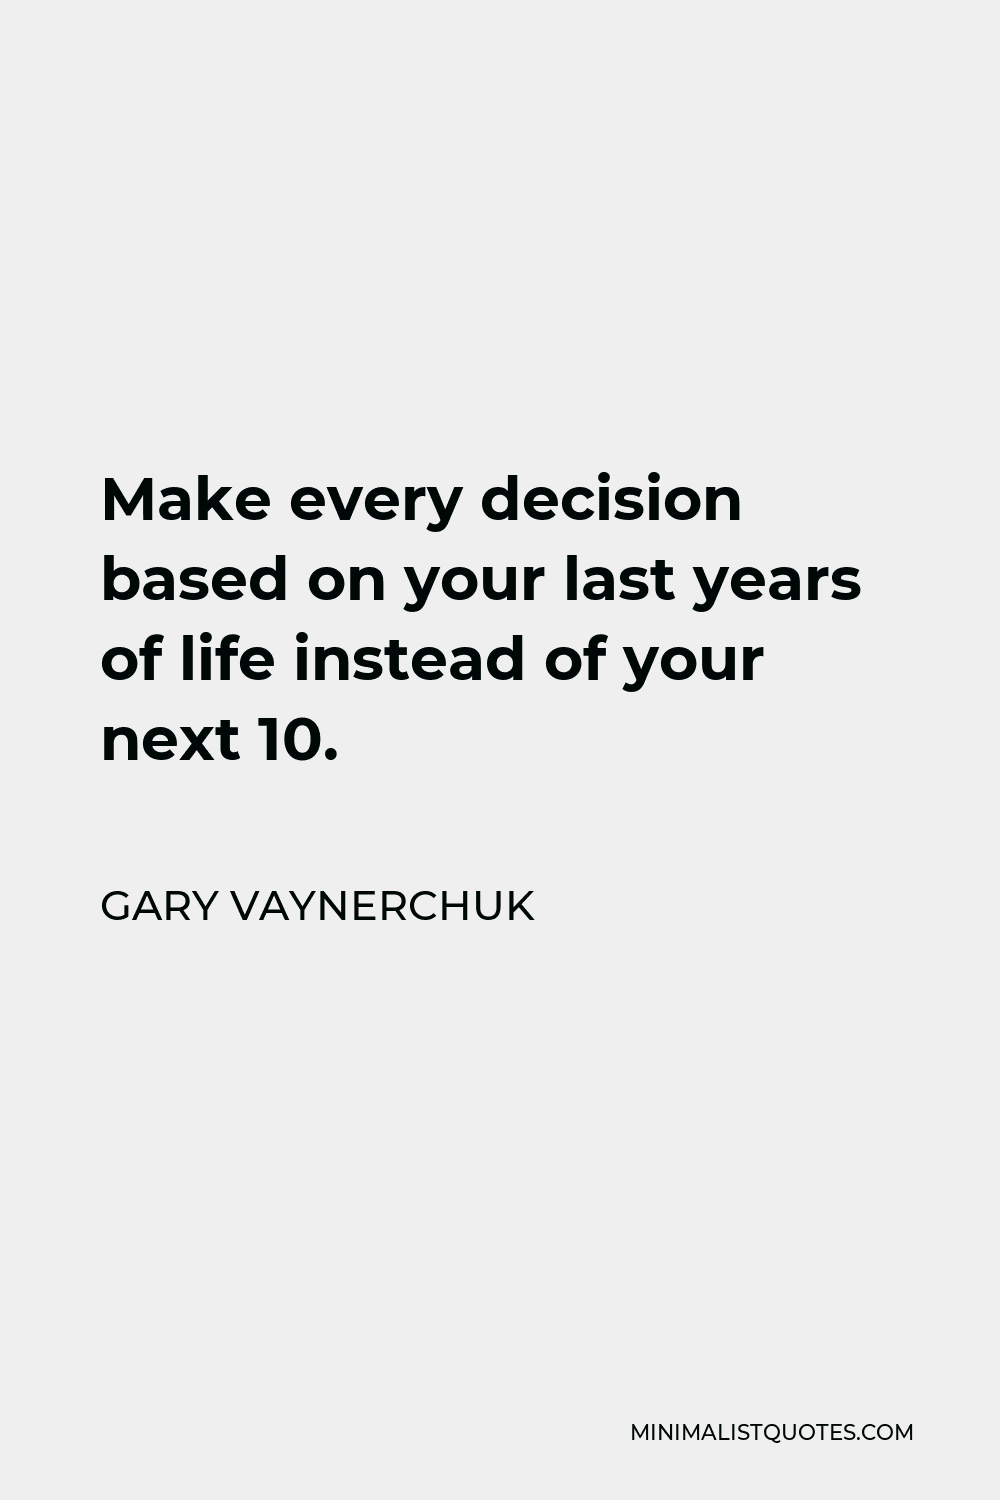 Gary Vaynerchuk Quote - Make every decision based on your last years of life instead of your next 10.